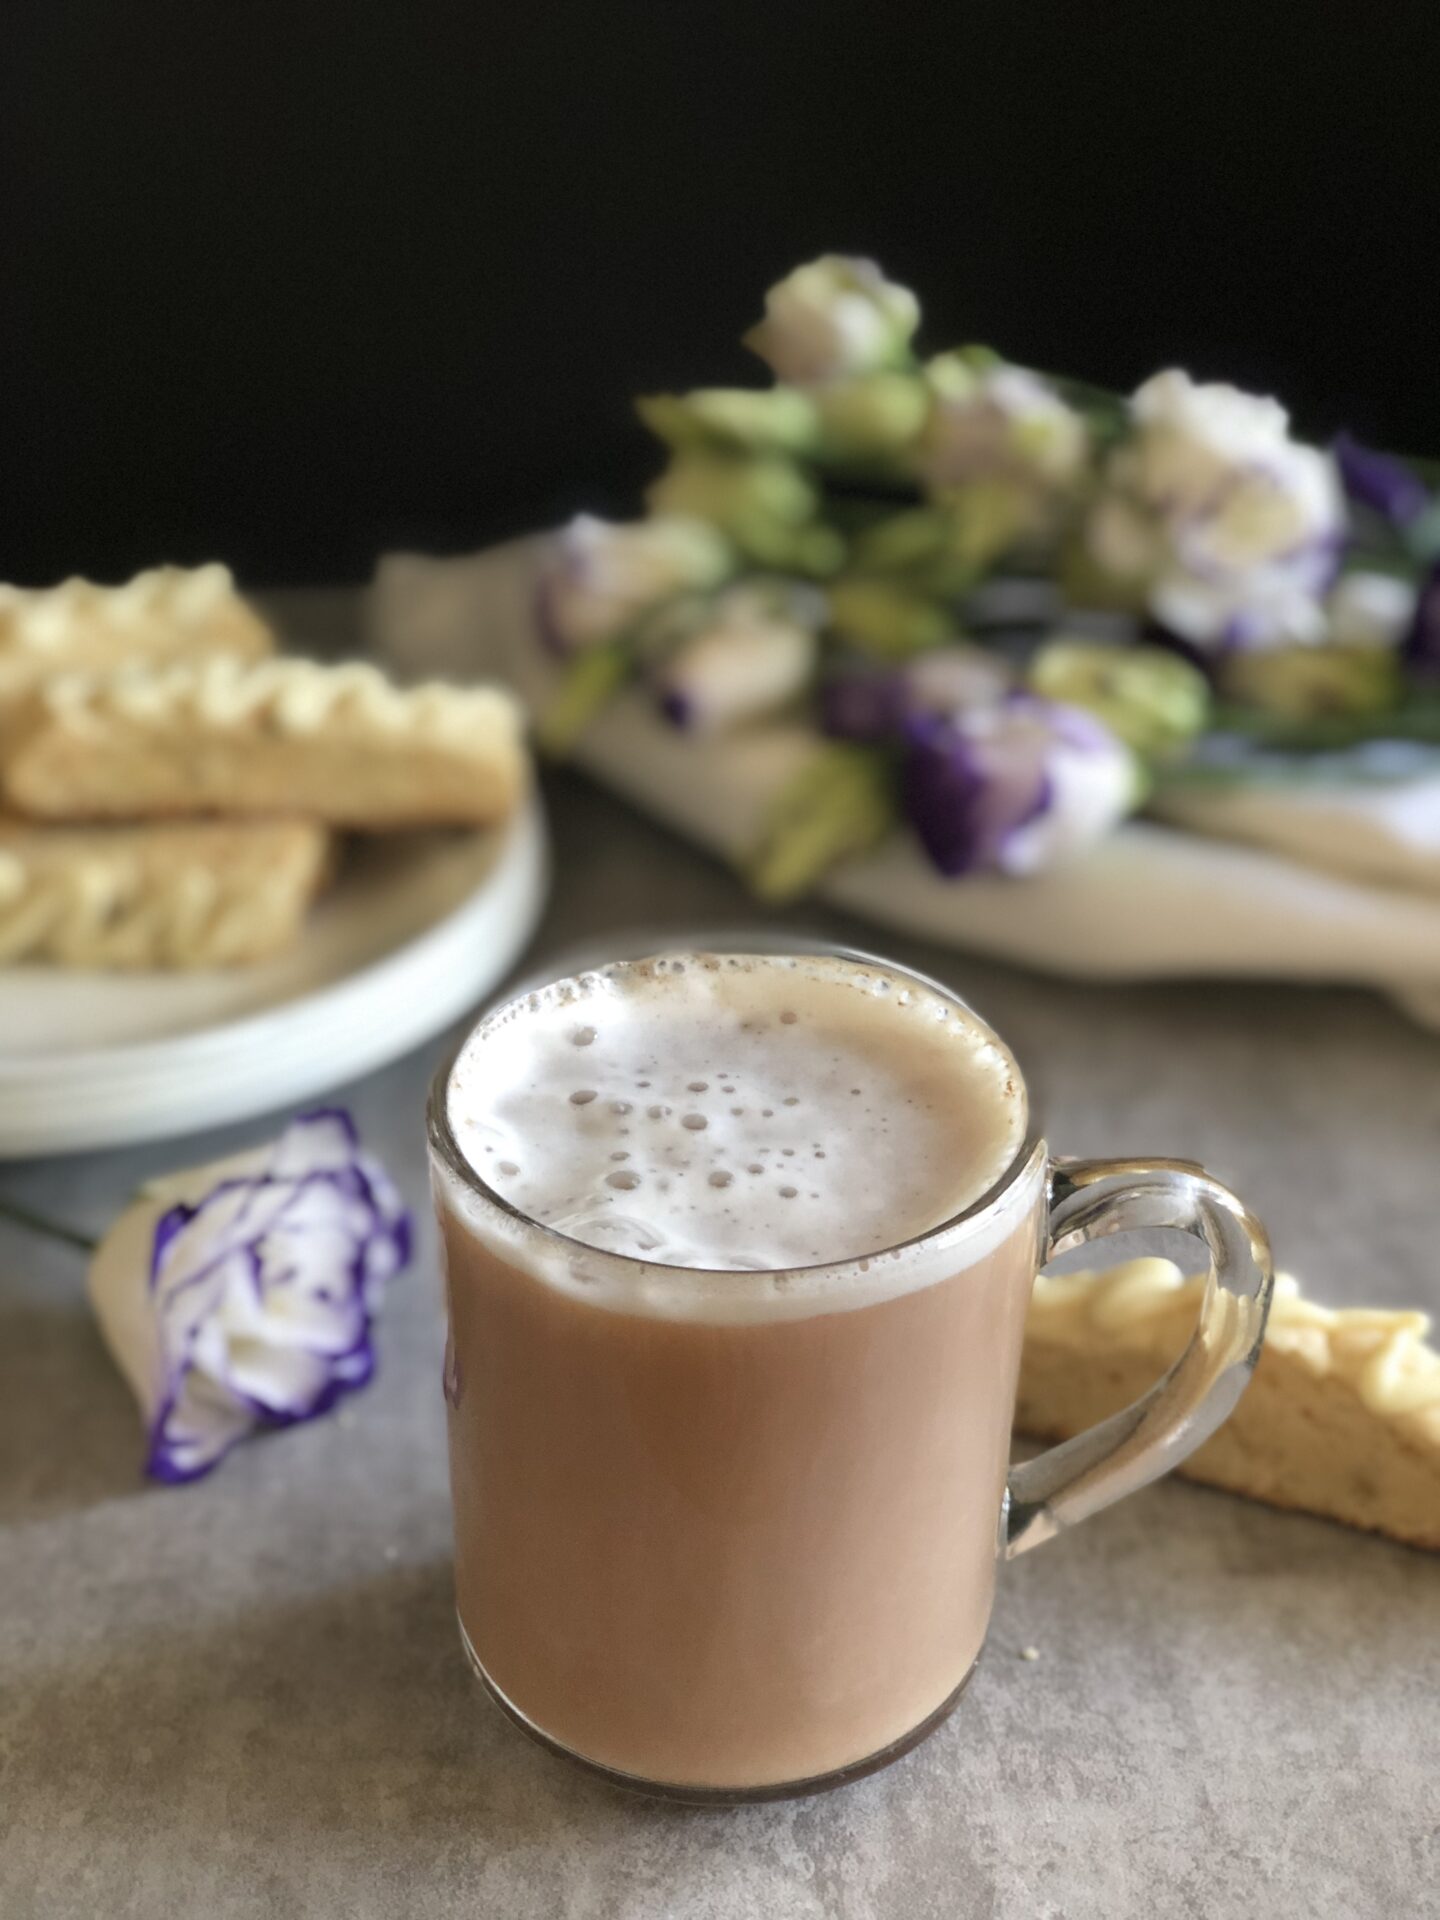 A clean mug of London Fog tea sits on a table surrounded by a platter of biscotti and some white and lavender roses 